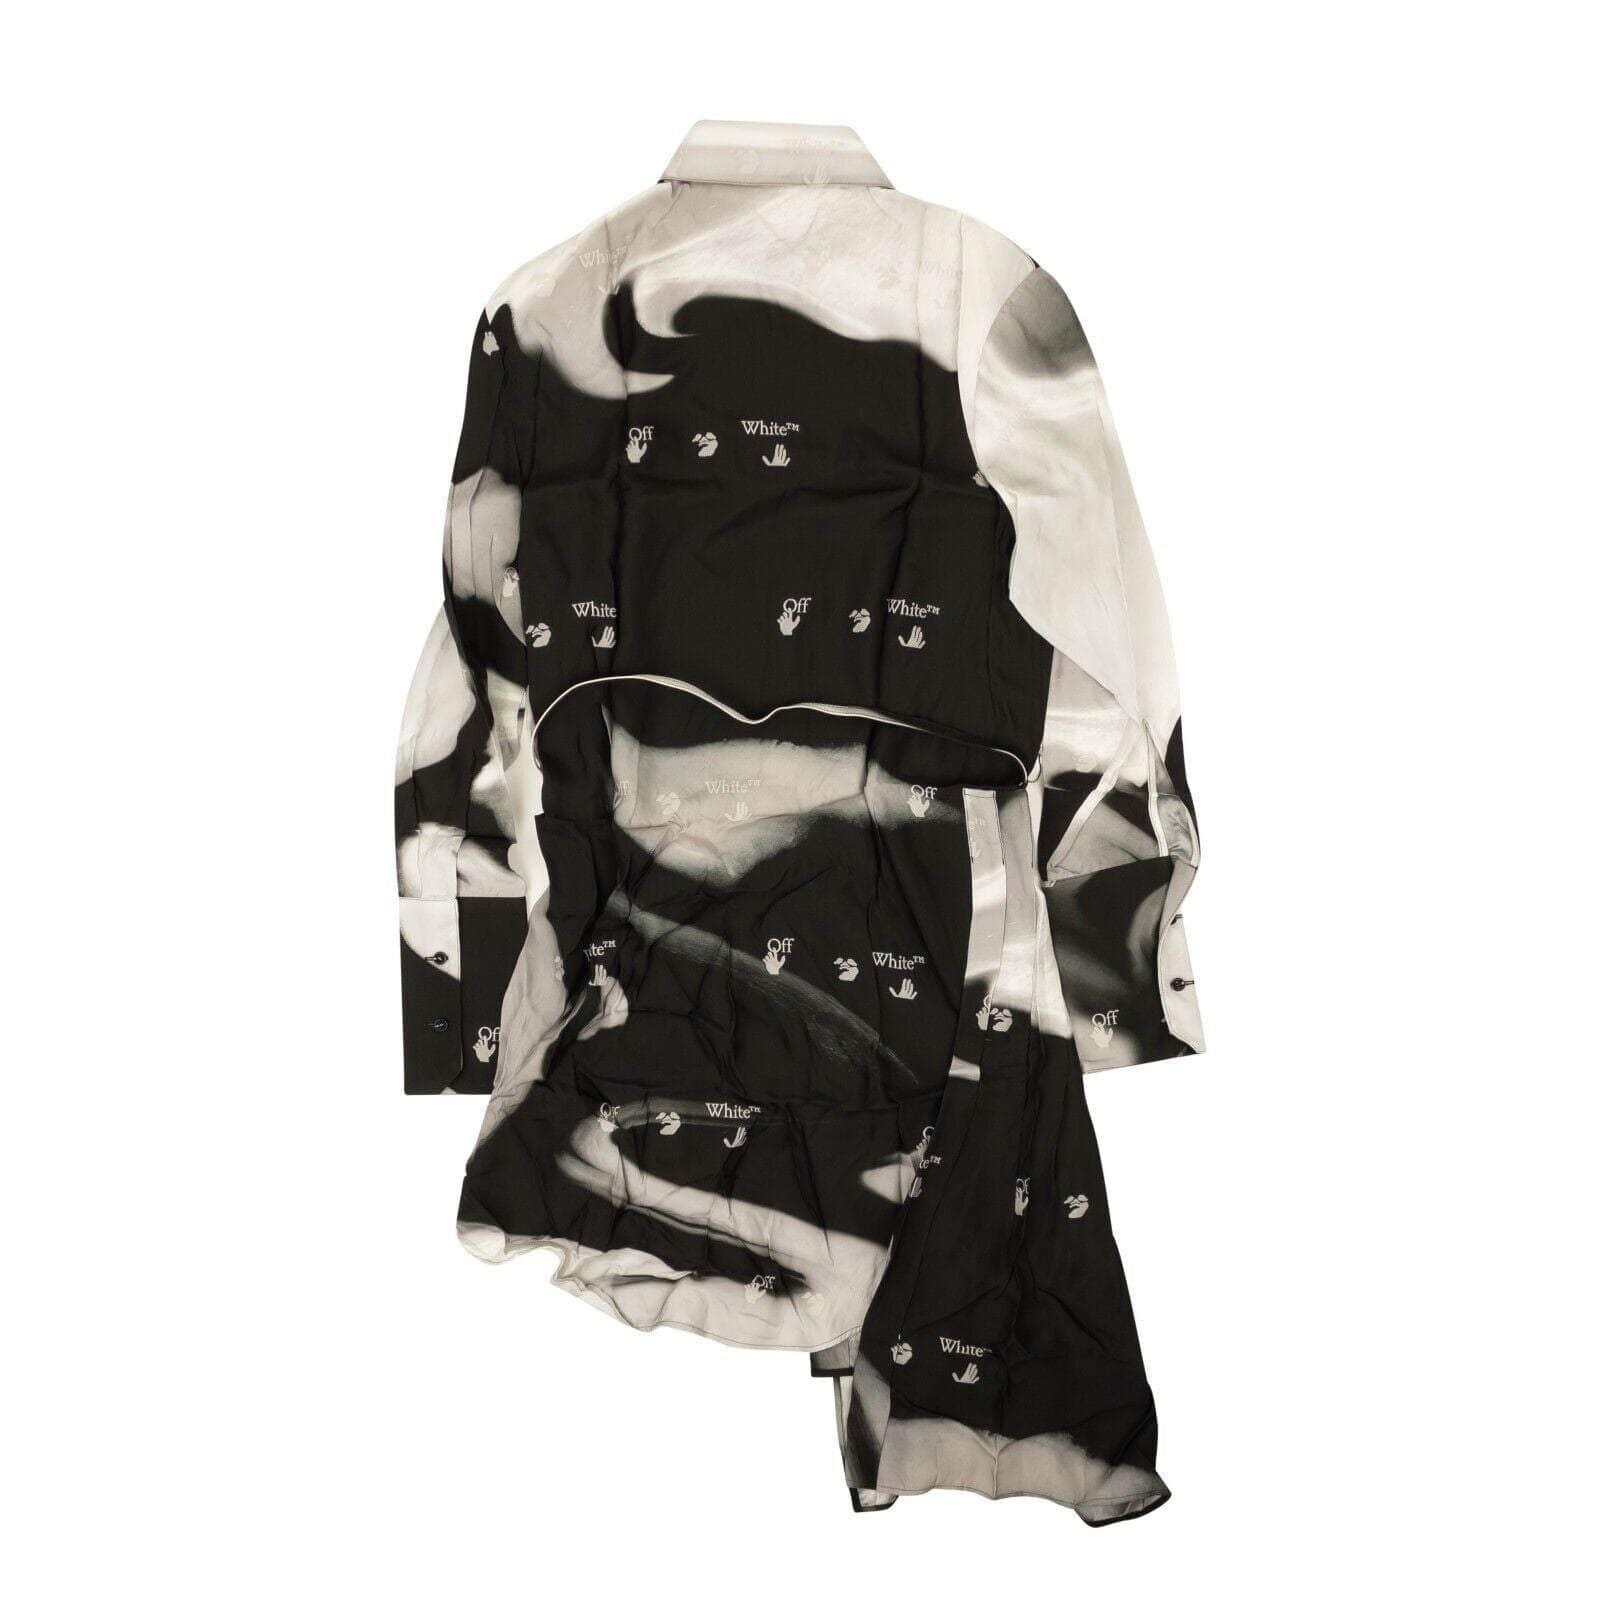 Off-White c/o Virgil Abloh 500-750, channelenable-all, chicmi, couponcollection, gender-womens, main-clothing, off-white-c-o-virgil-abloh, oww1, size-38, SPO, womens-shirt-dresses 38 Black Melt Plisse Shirt Dress OFW-XTPS-0029/38 OFW-XTPS-0029/38